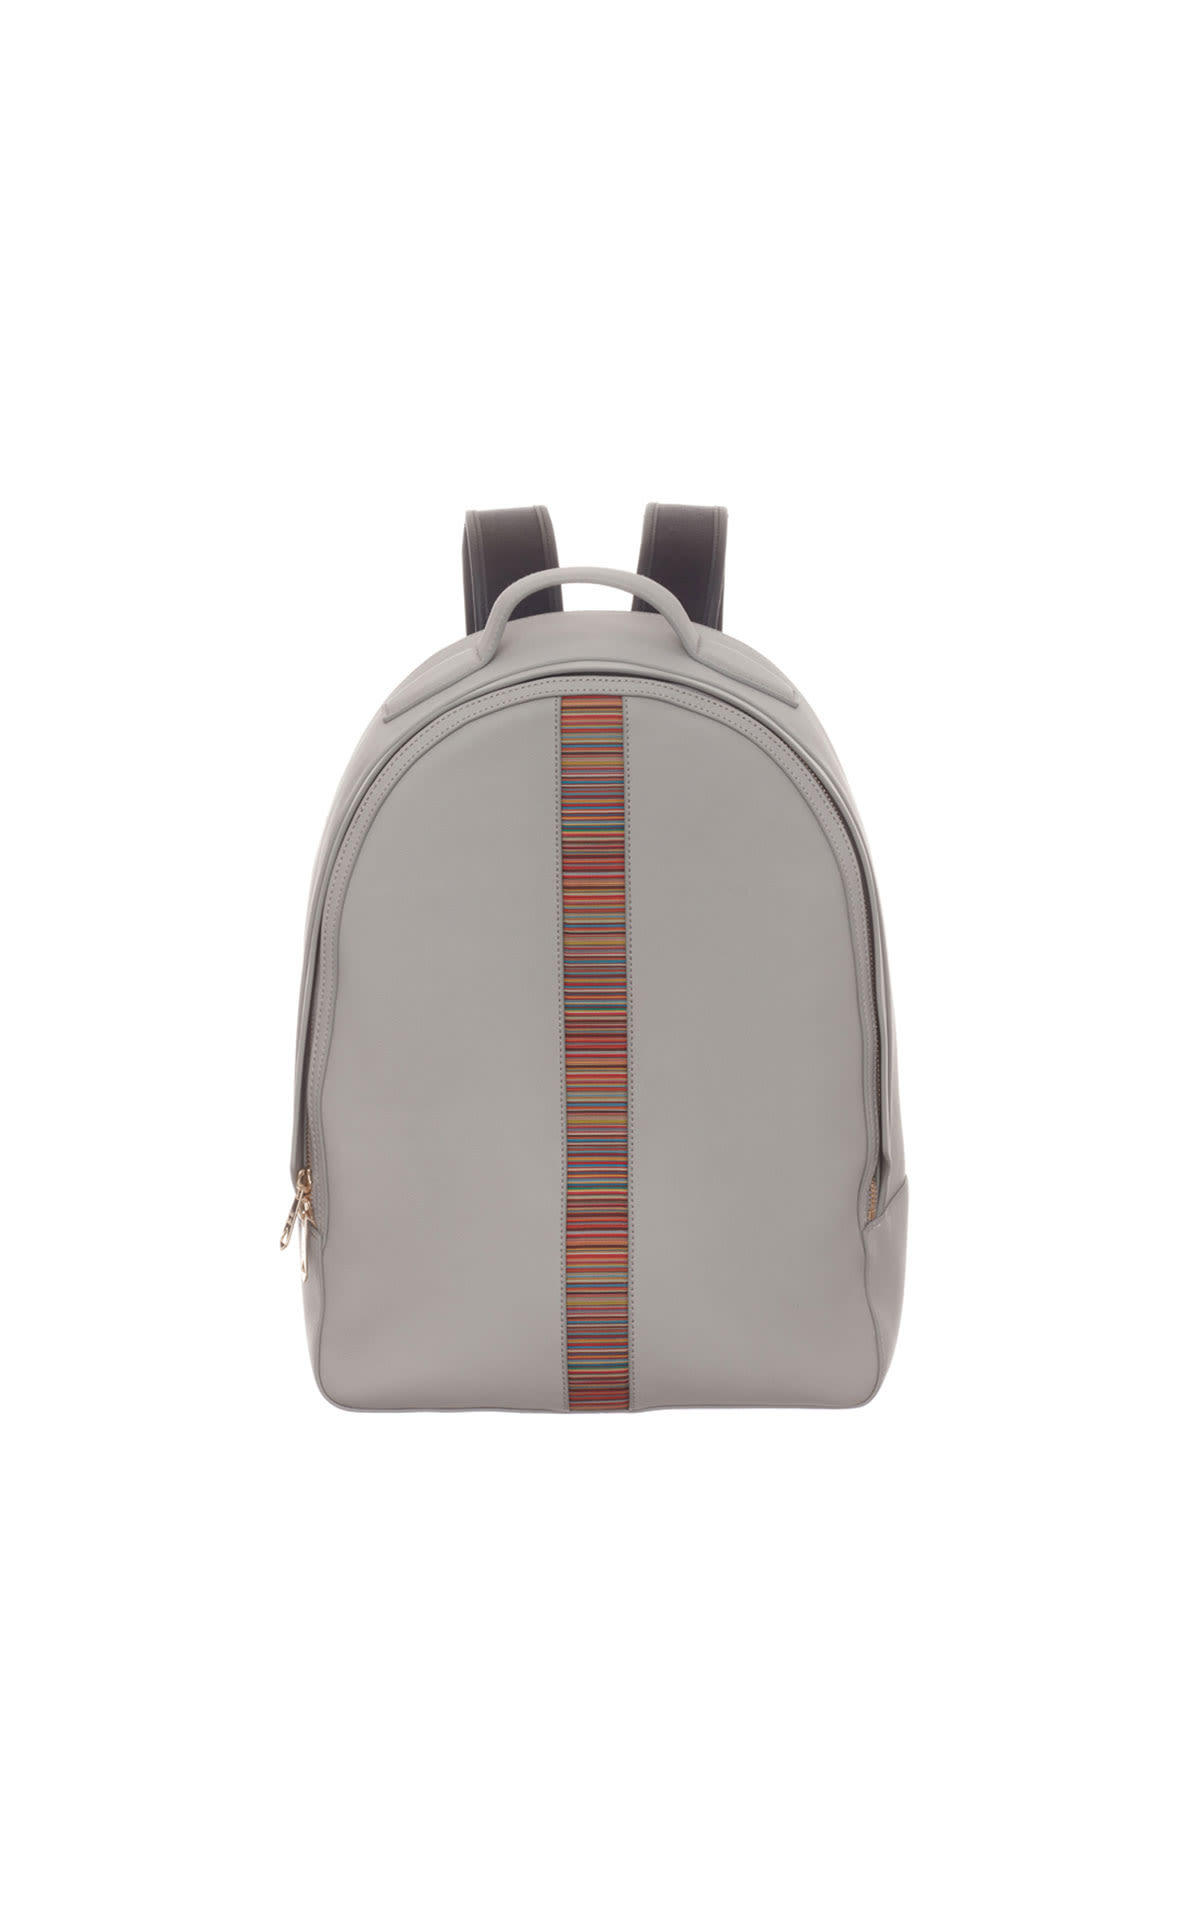 Paul Smith Stripe backpack from Bicester Village